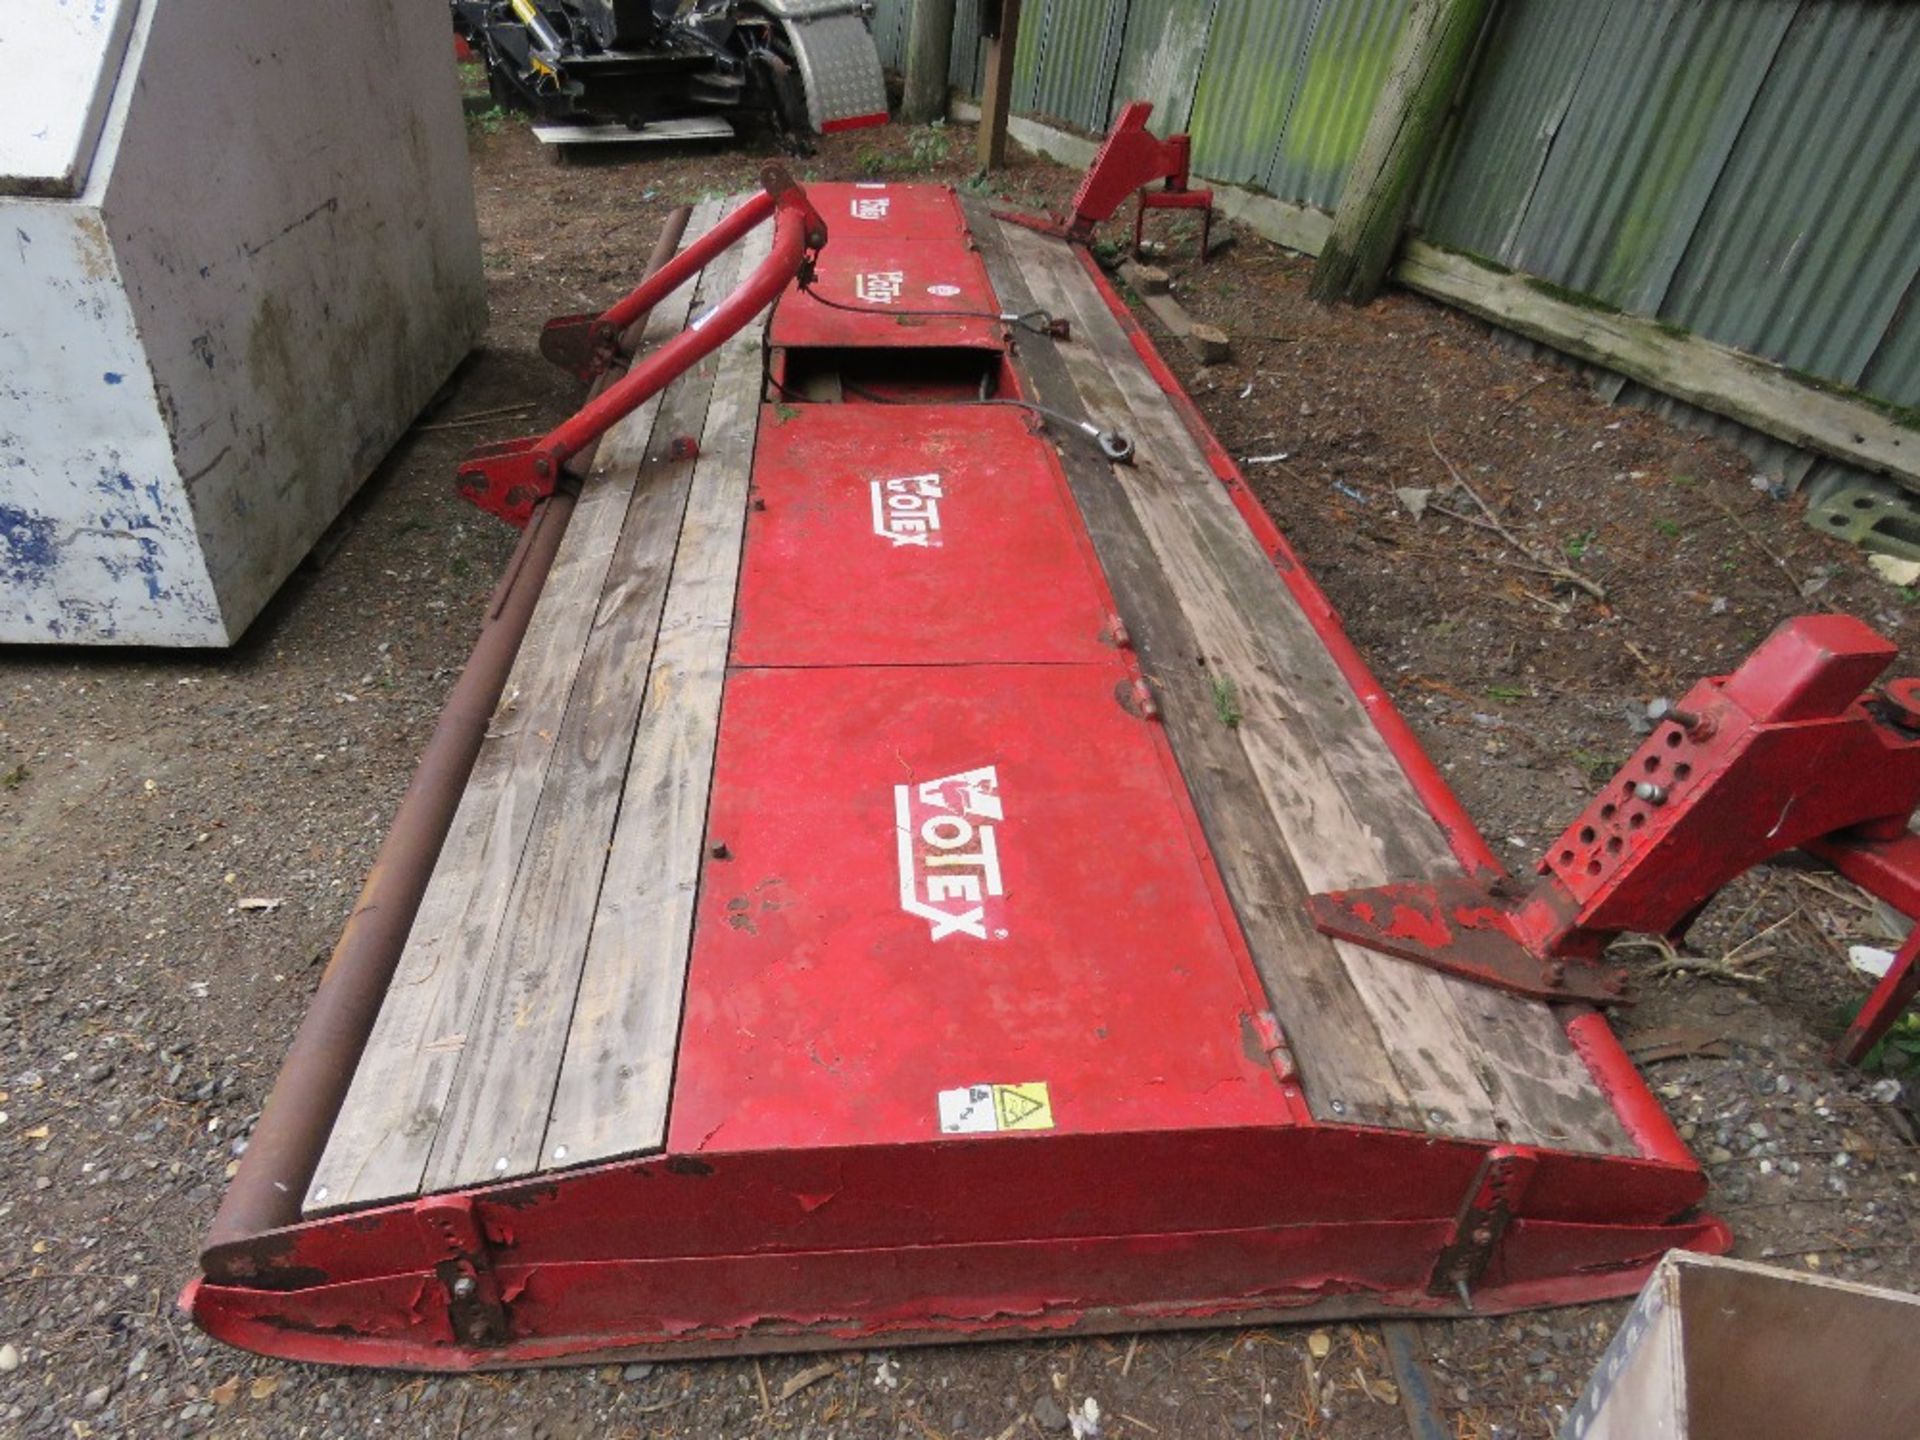 VOTEX LARGE TRACTOR MOUNTED TOPPER MOWER, INCOMPLETE, 14FT WIDTH APPROX. SOURCED FROM A LARGE ESTATE - Image 2 of 6